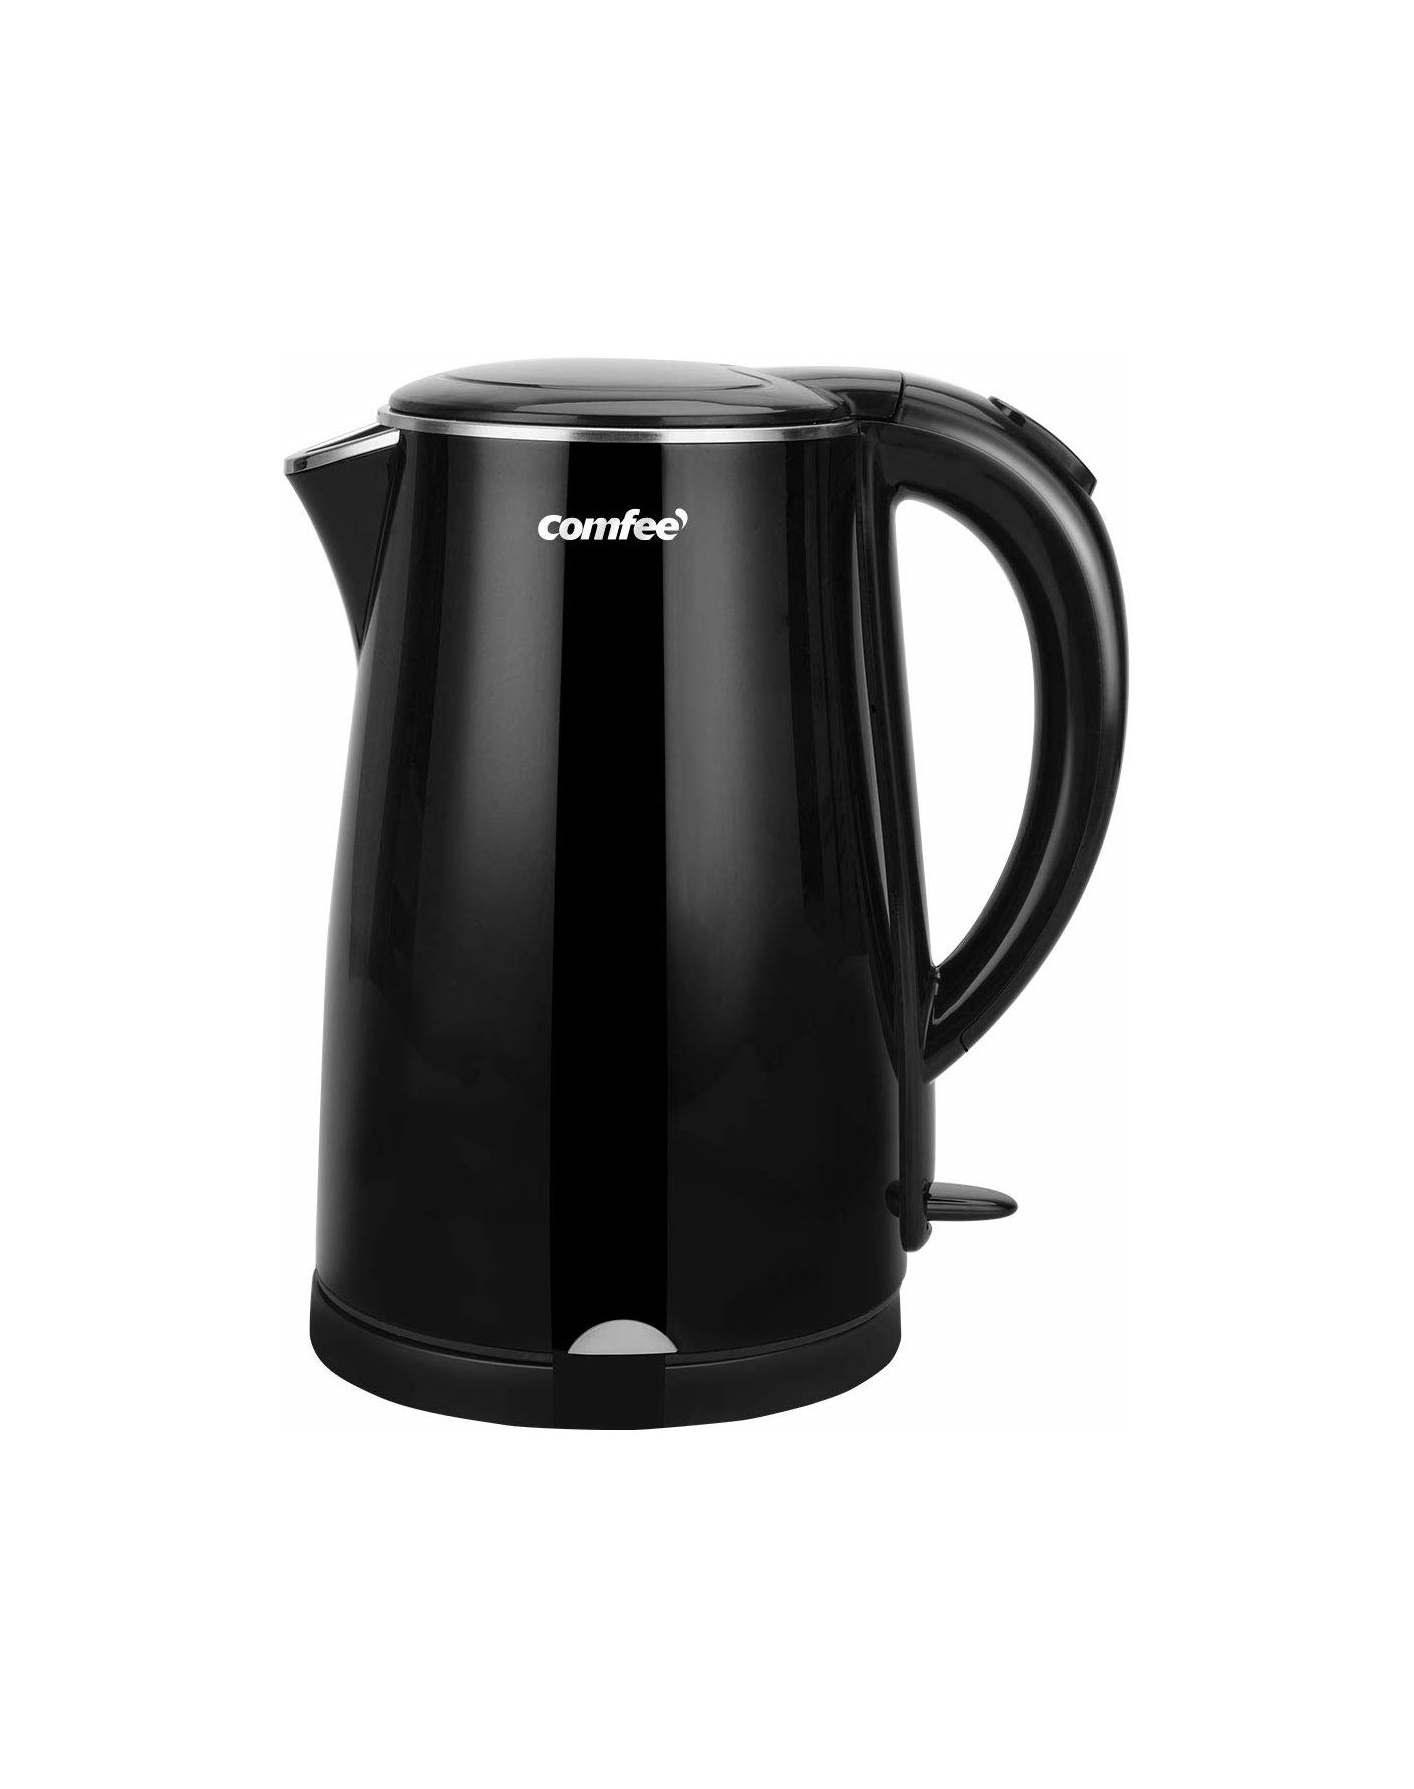 COMFEE' 1.7L Double Wall & Low Noise Electric Kettle with 100% Stainless Steel Inner Pot and Lid. Cool Touch & BPA Free. 1500W Fast Boil. Cordless with Auto Shut-Off & Boil Dry Protection. Black